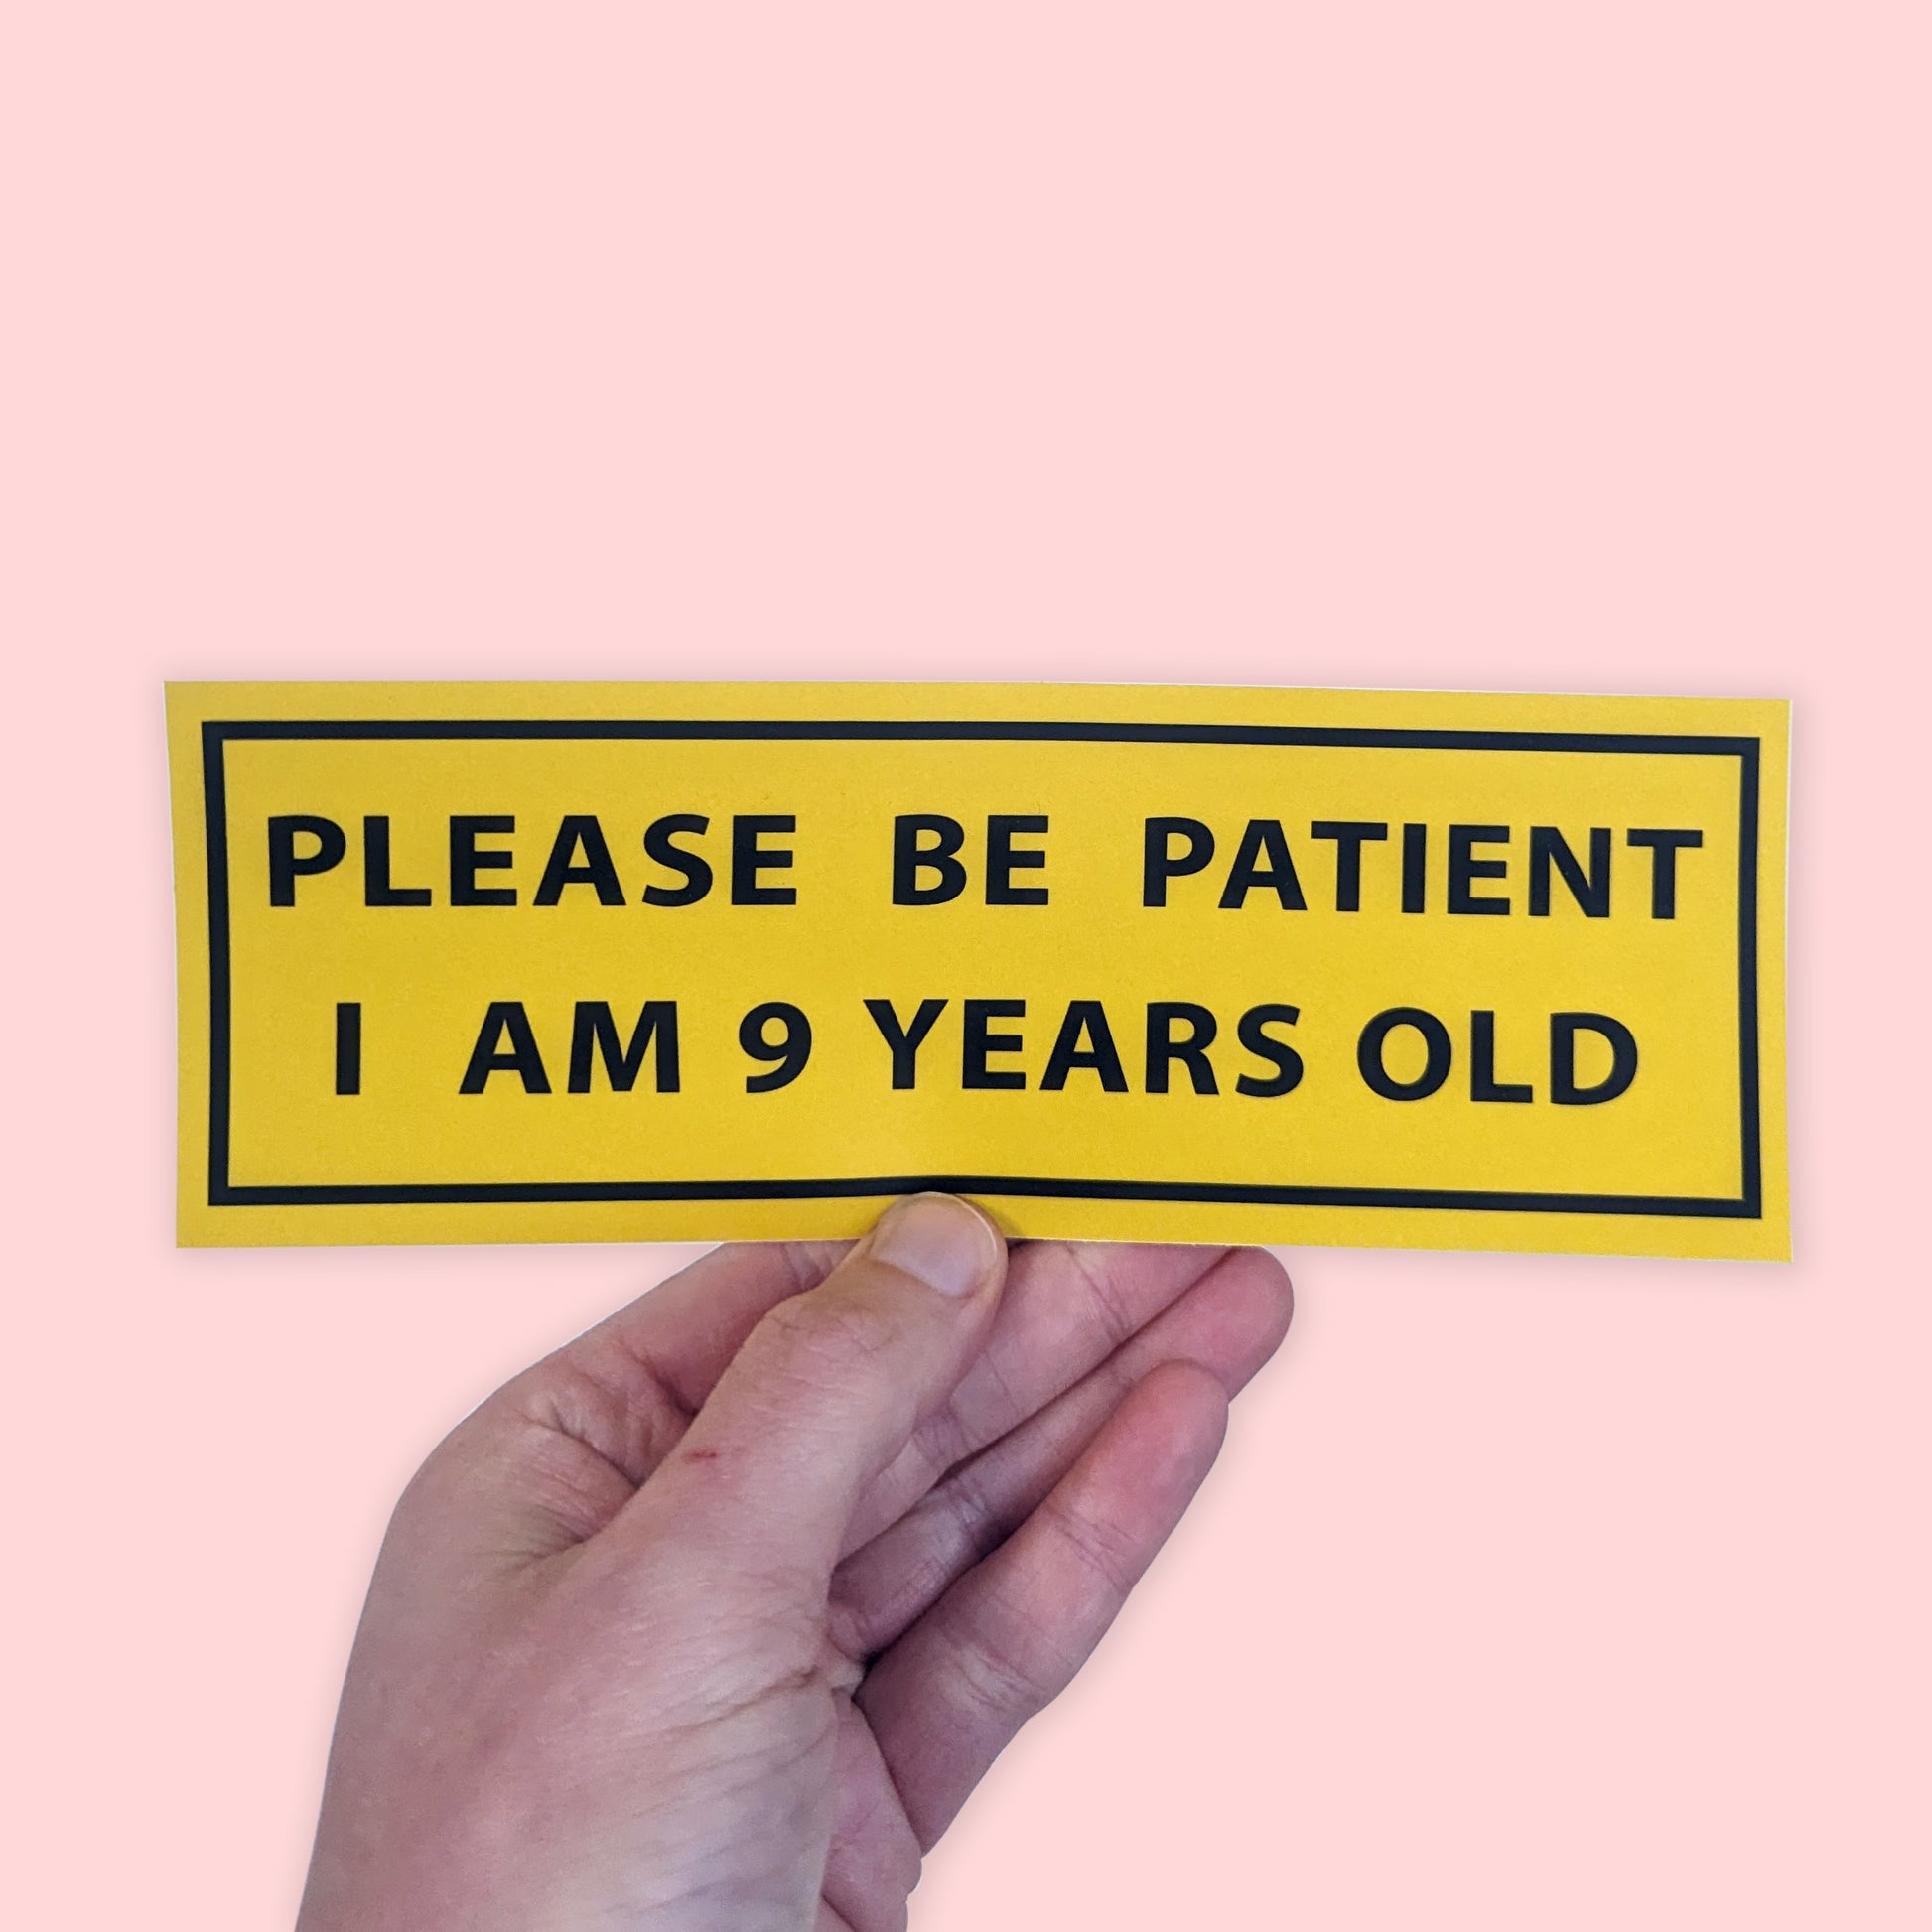 Please Be Patient, I am 9 Years Old Bumper Sticker